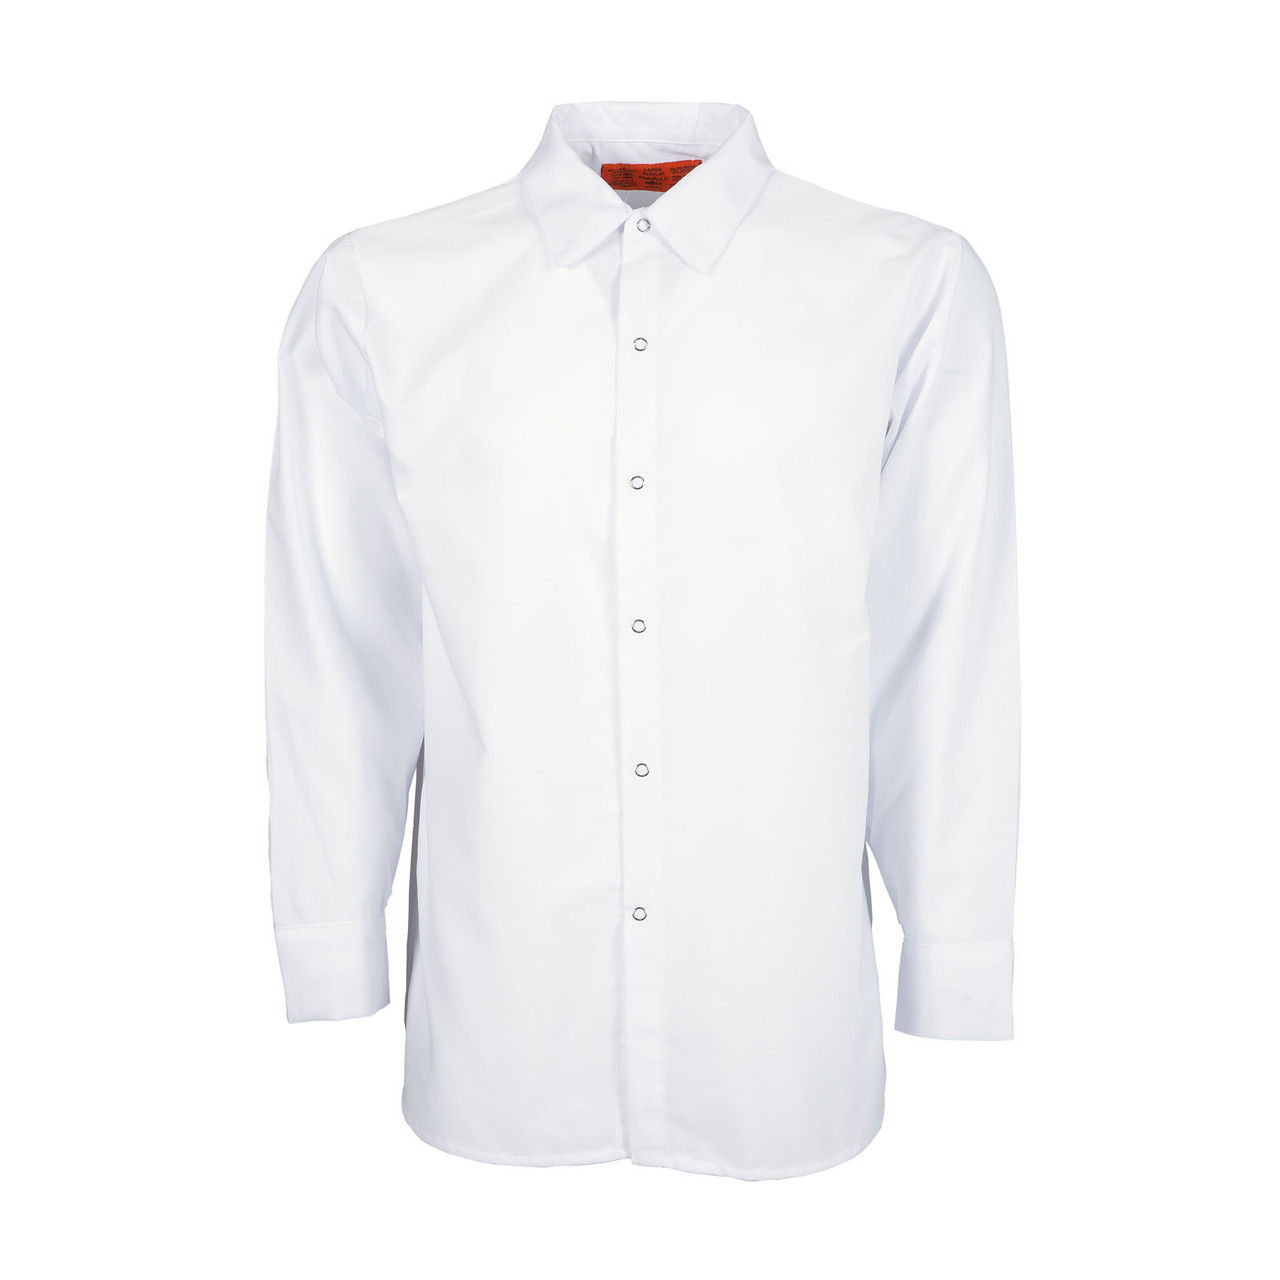 Is the color of these white work shirts mens?